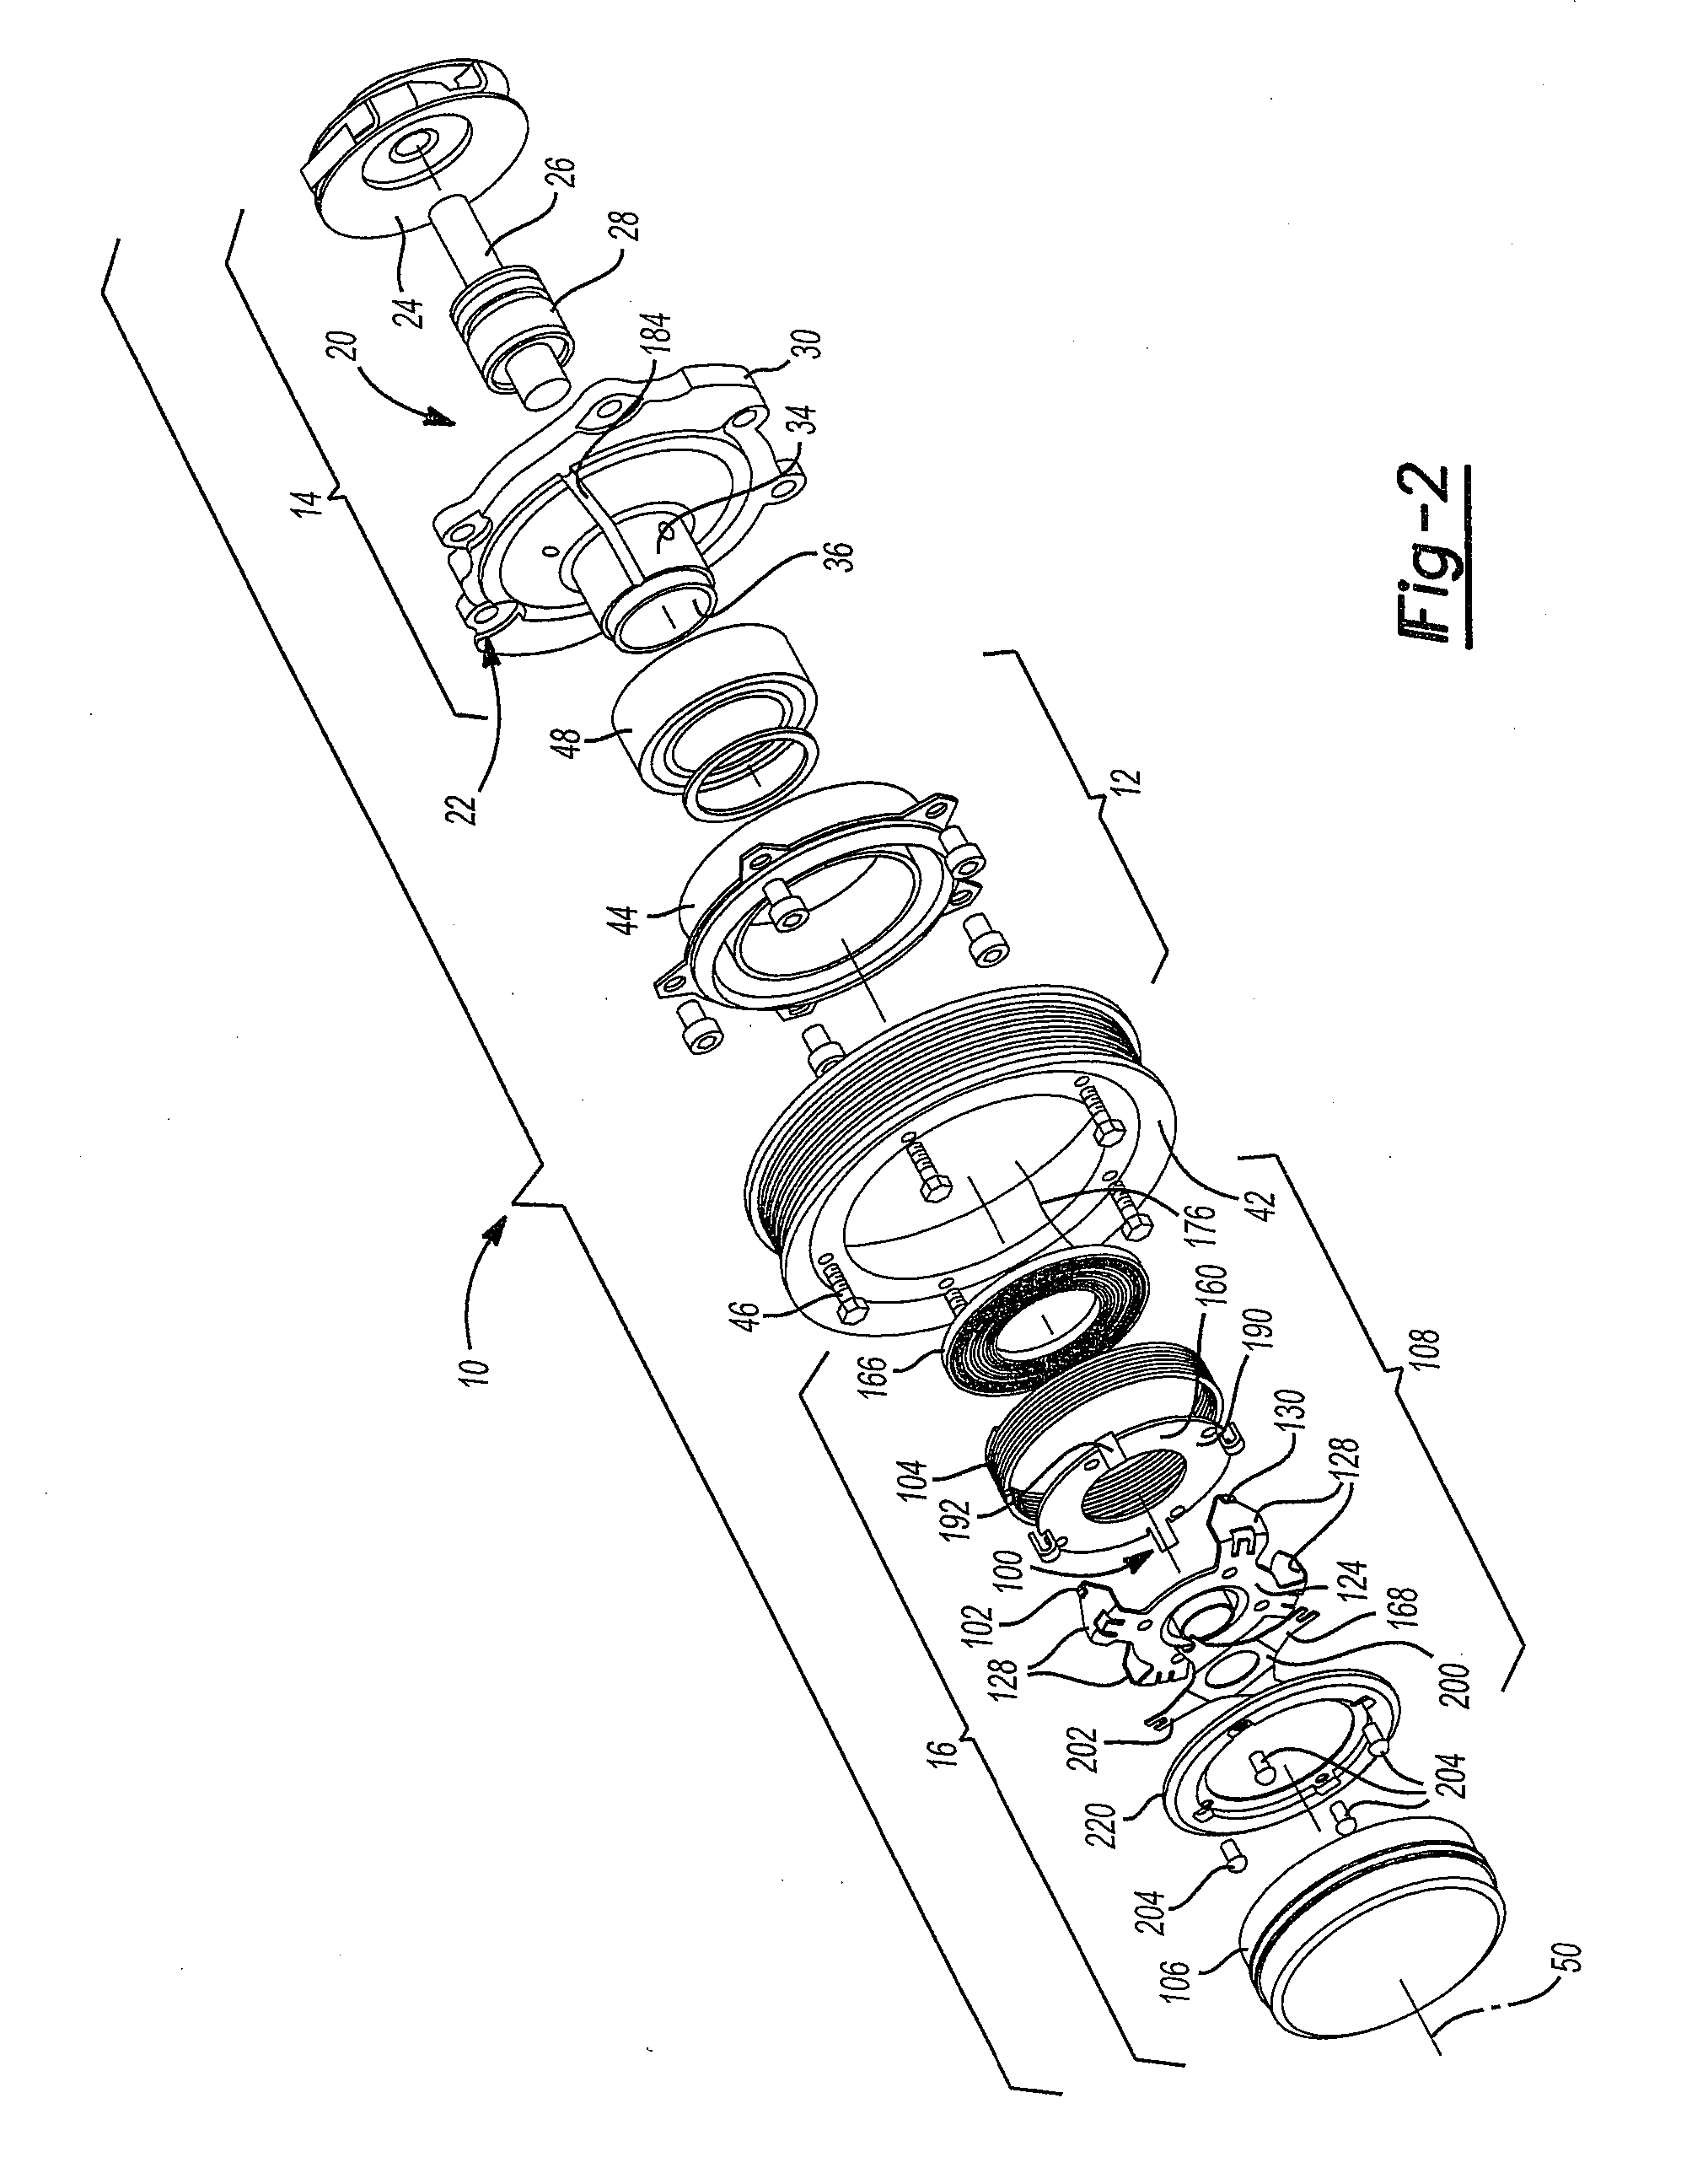 Driven accessory with low-power clutch for activating or de-activating same